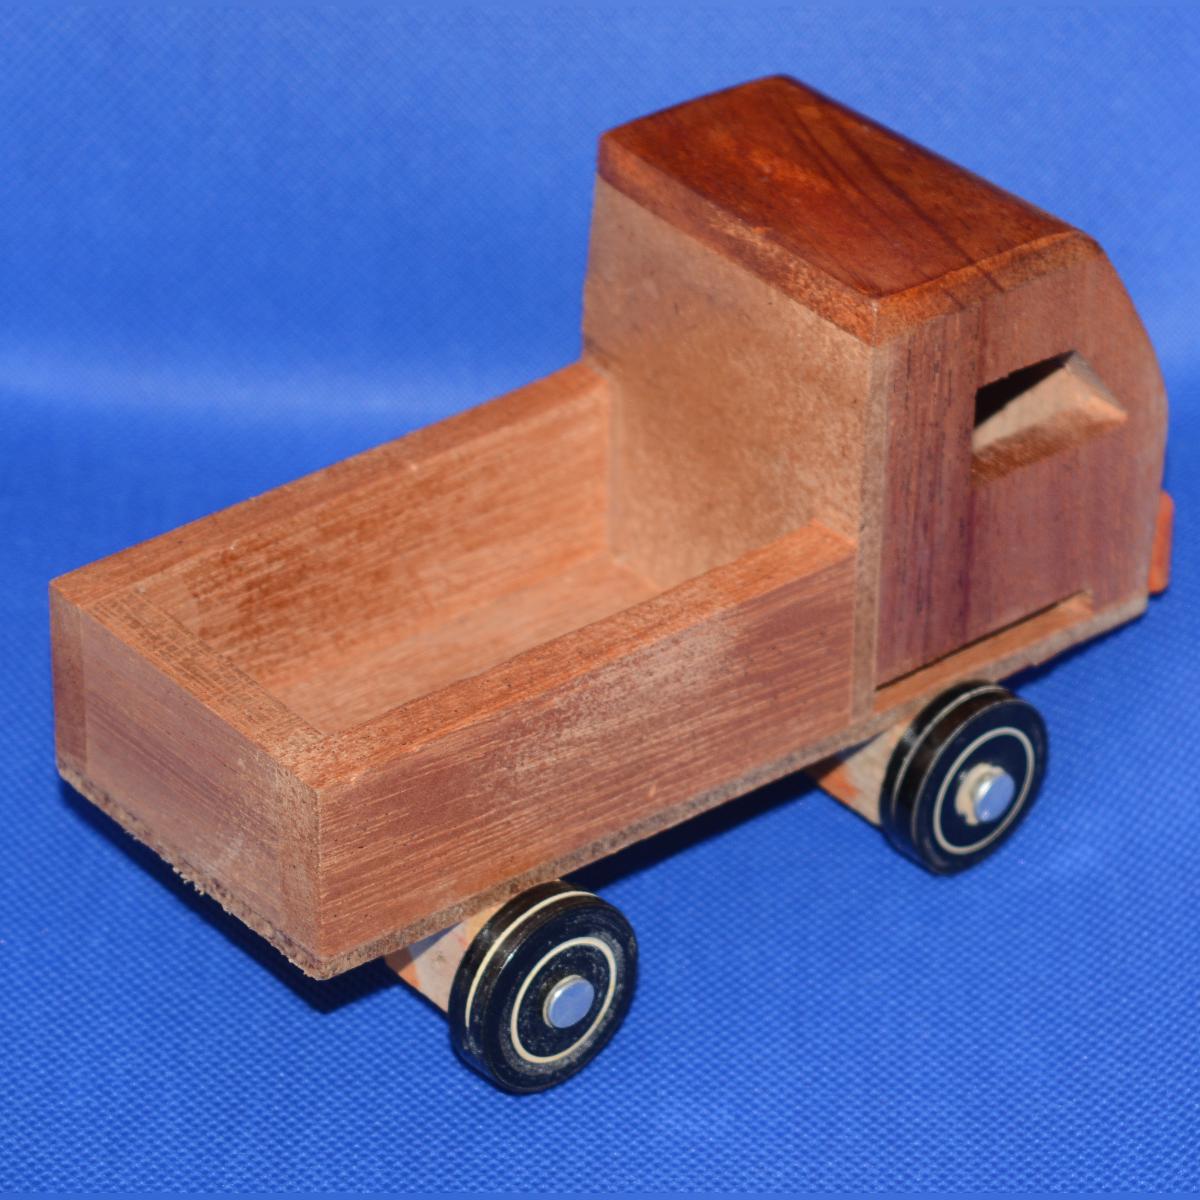 Channapatna toy small truck